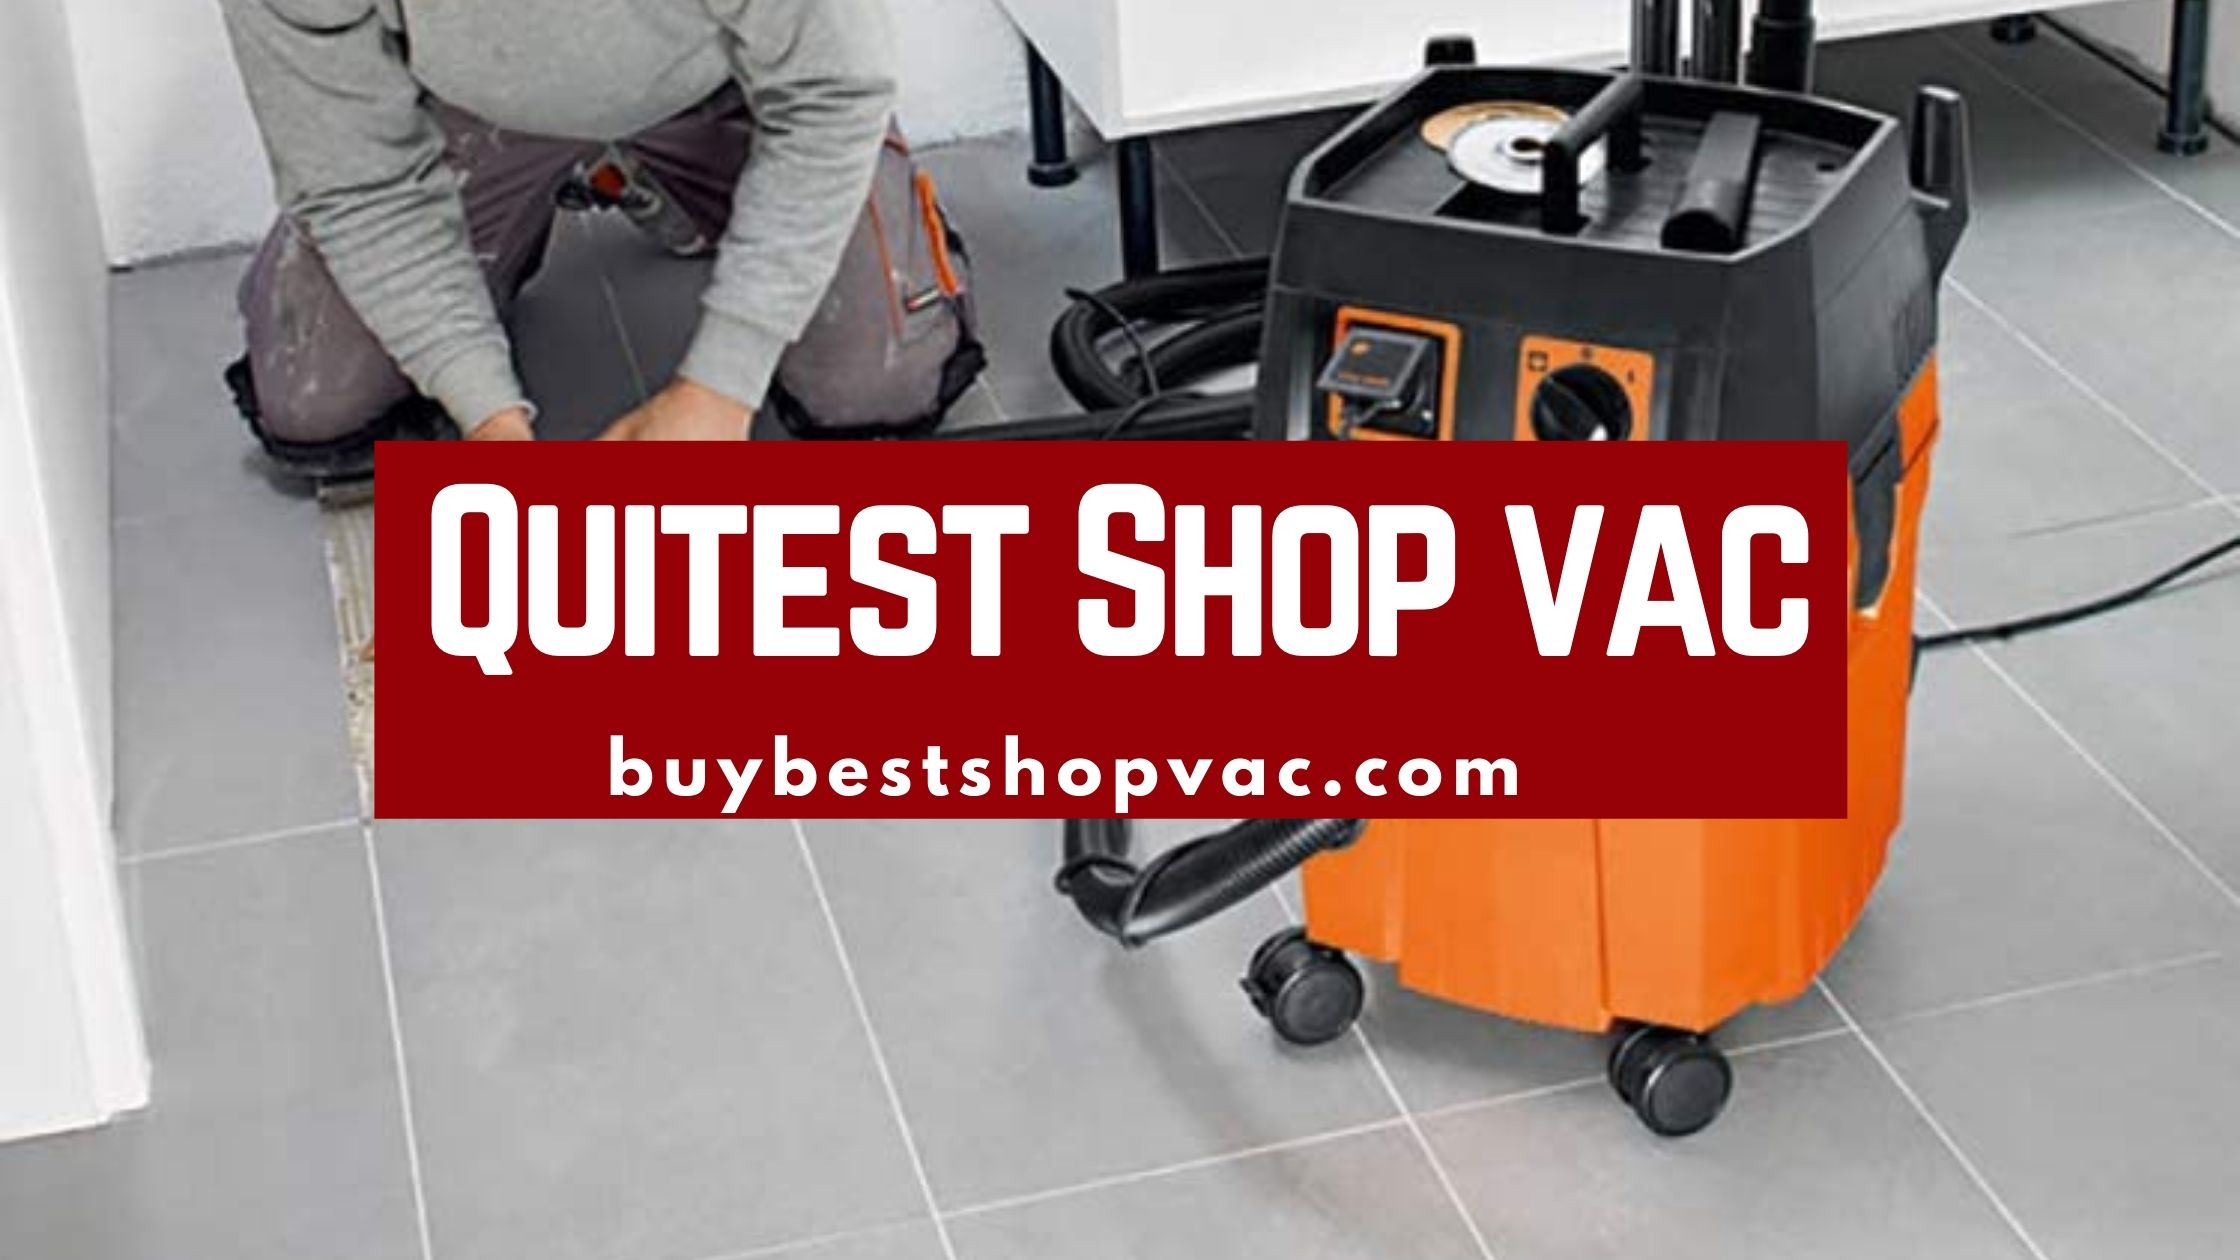 Which Shop Vac is the Quietest